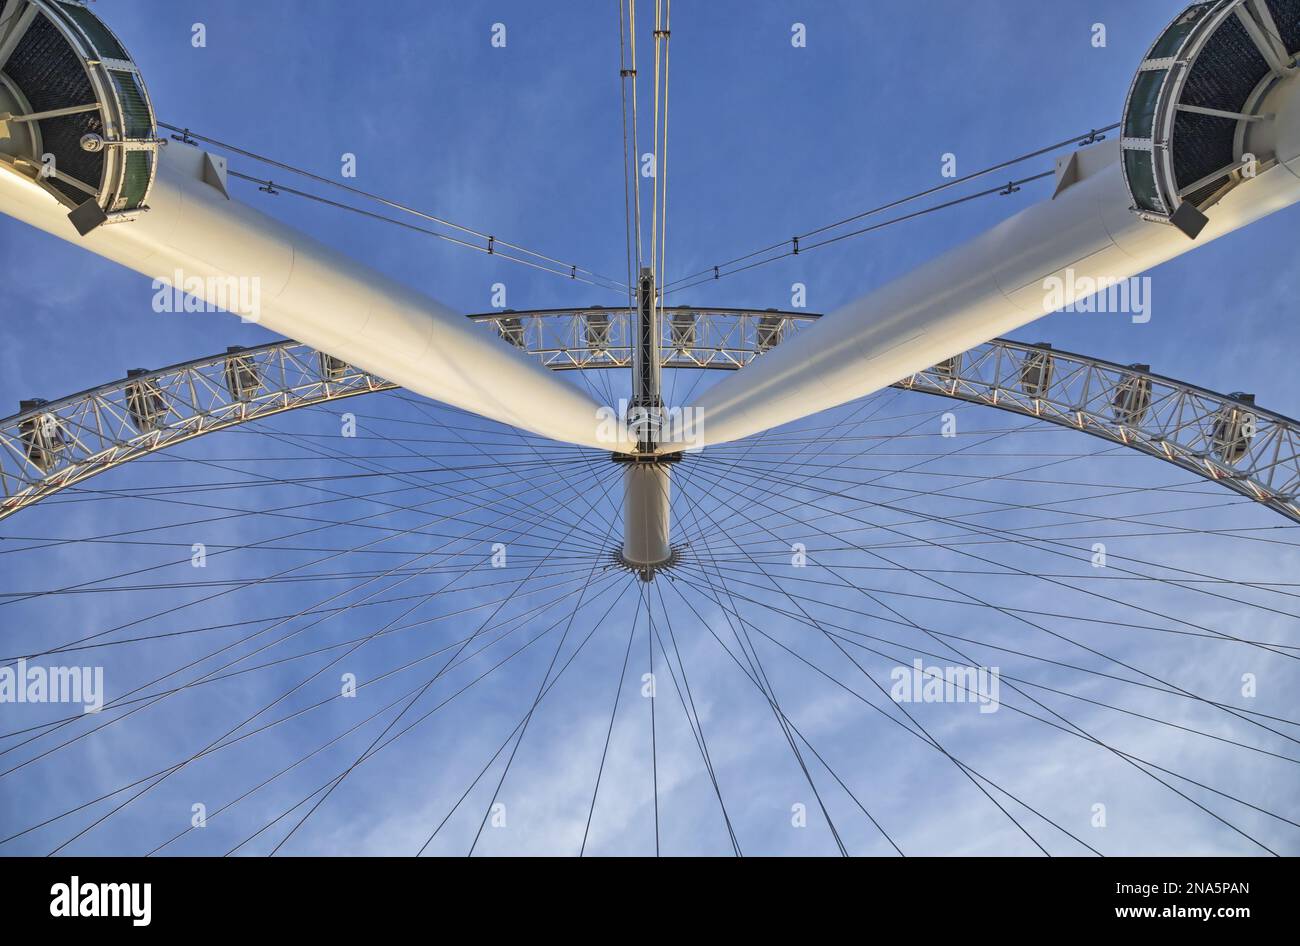 View from directly below the cables and pods of the London Eye with a blue sky in the background; London, England Stock Photo